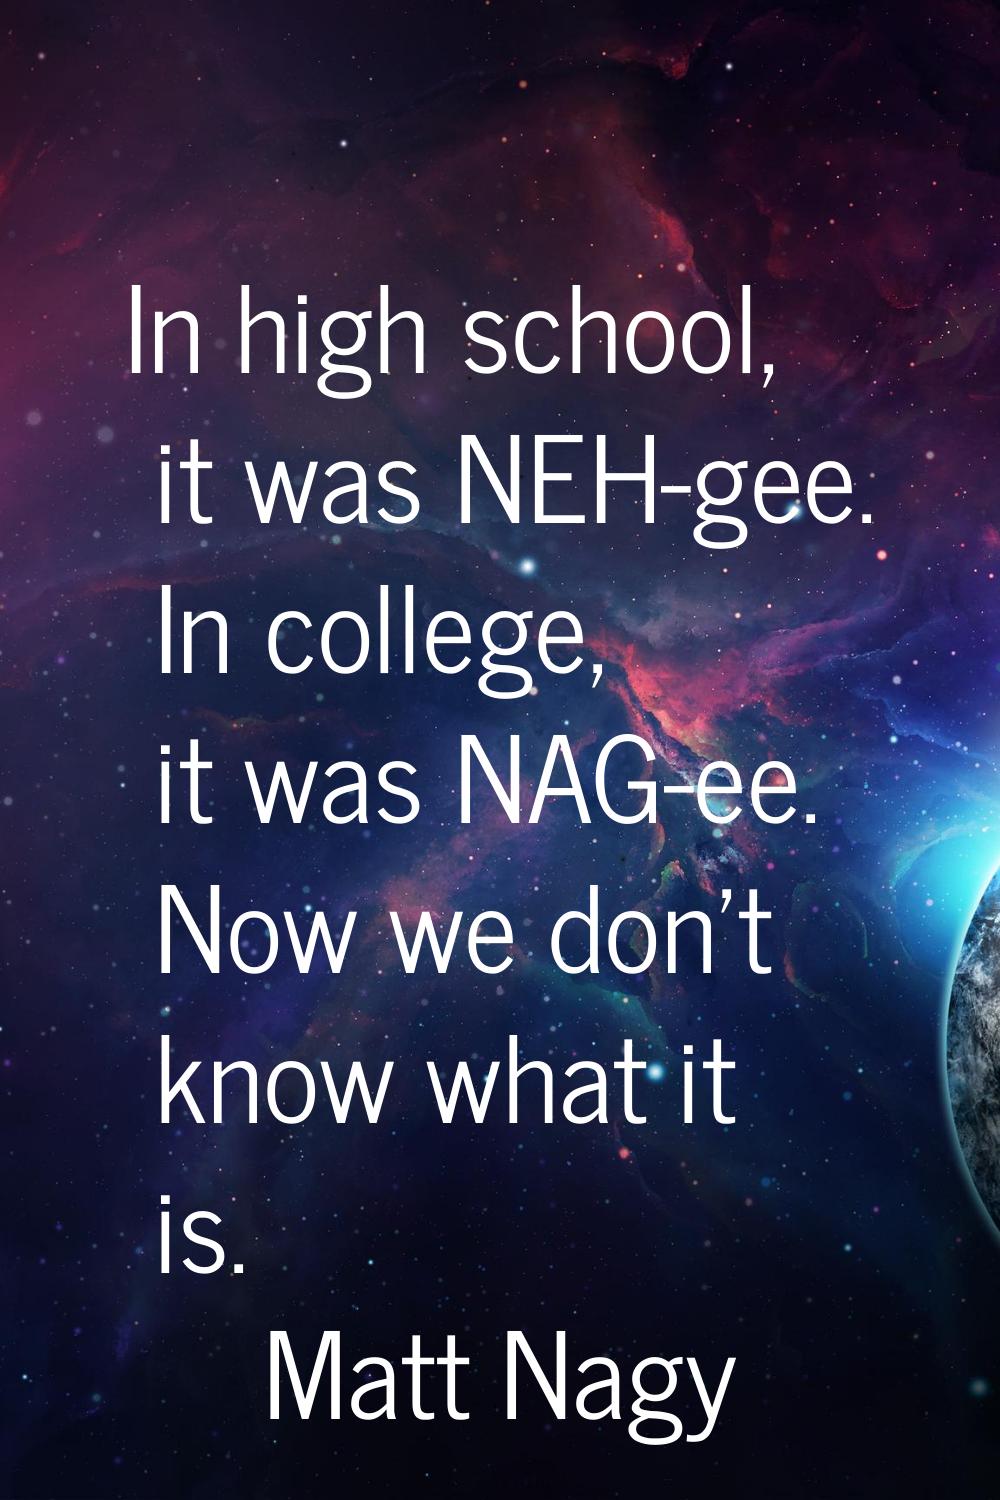 In high school, it was NEH-gee. In college, it was NAG-ee. Now we don't know what it is.